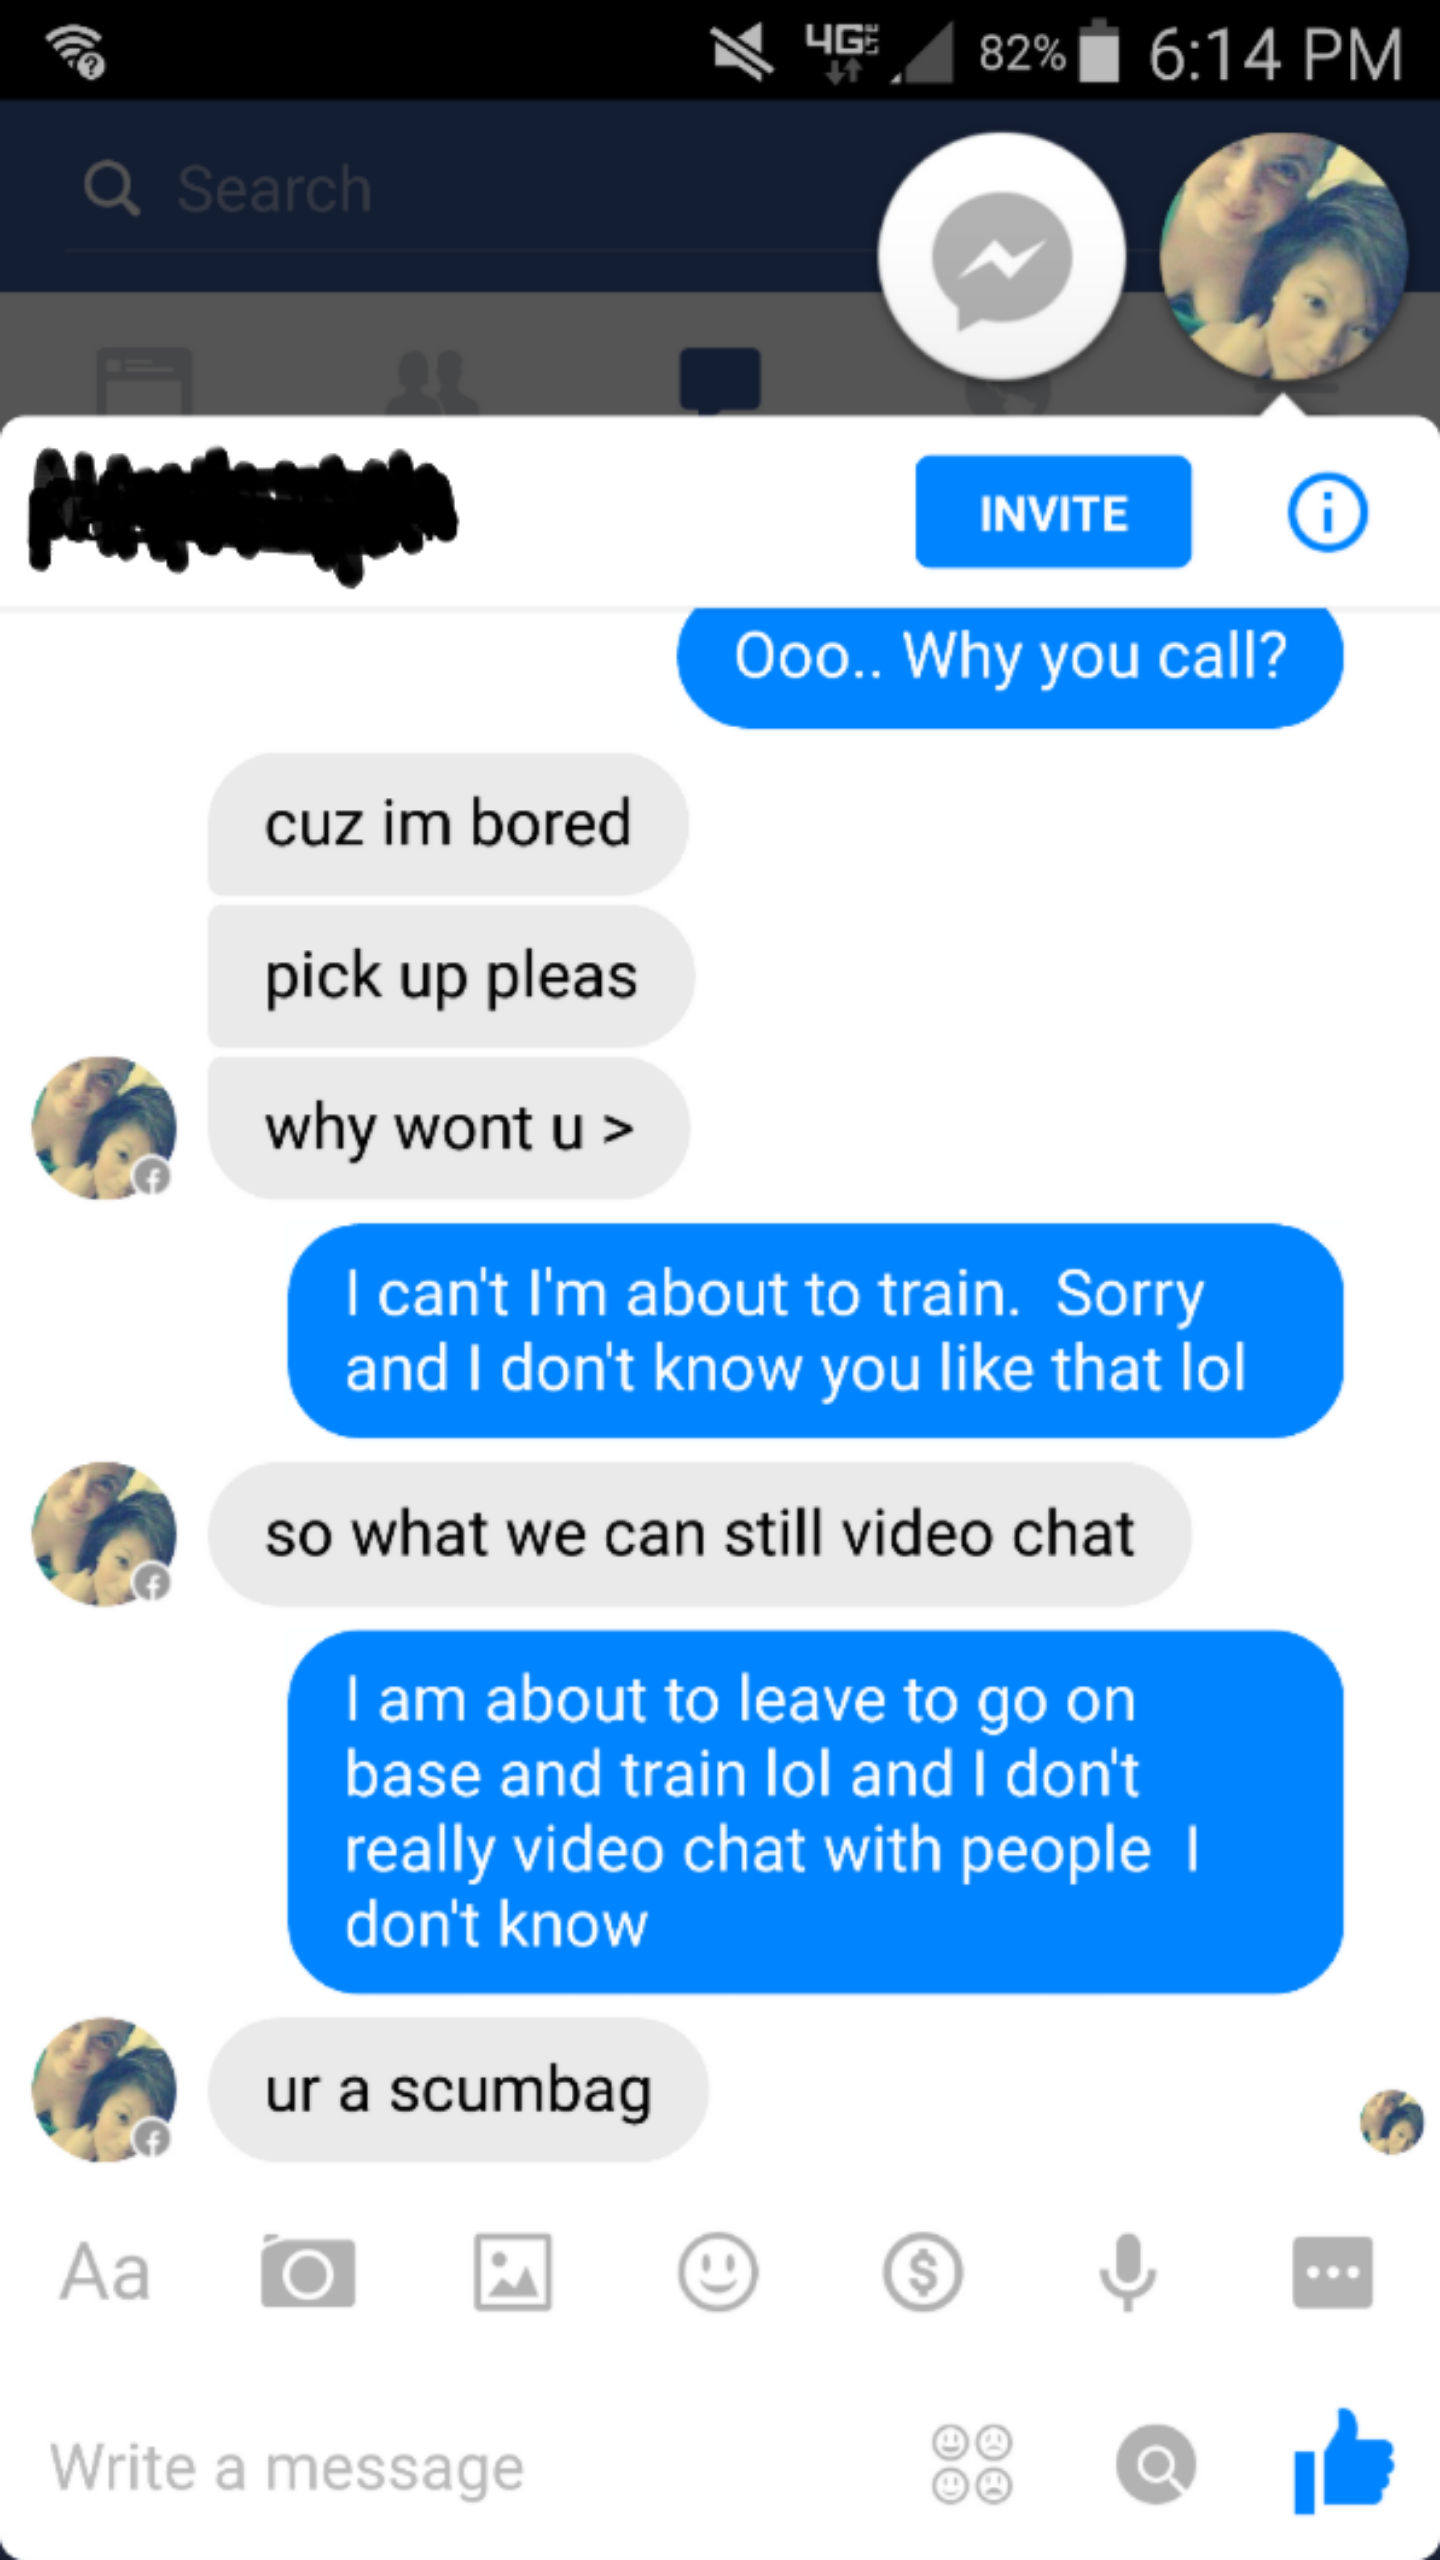 he's bad for me but i want him - 4.82% a Search Invite Ooo.. Why you call? cuz im bored pick up pleas why wont u > I can't I'm about to train. Sorry and I don't know you that lol so what we can still video chat I am about to leave to go on base and train 